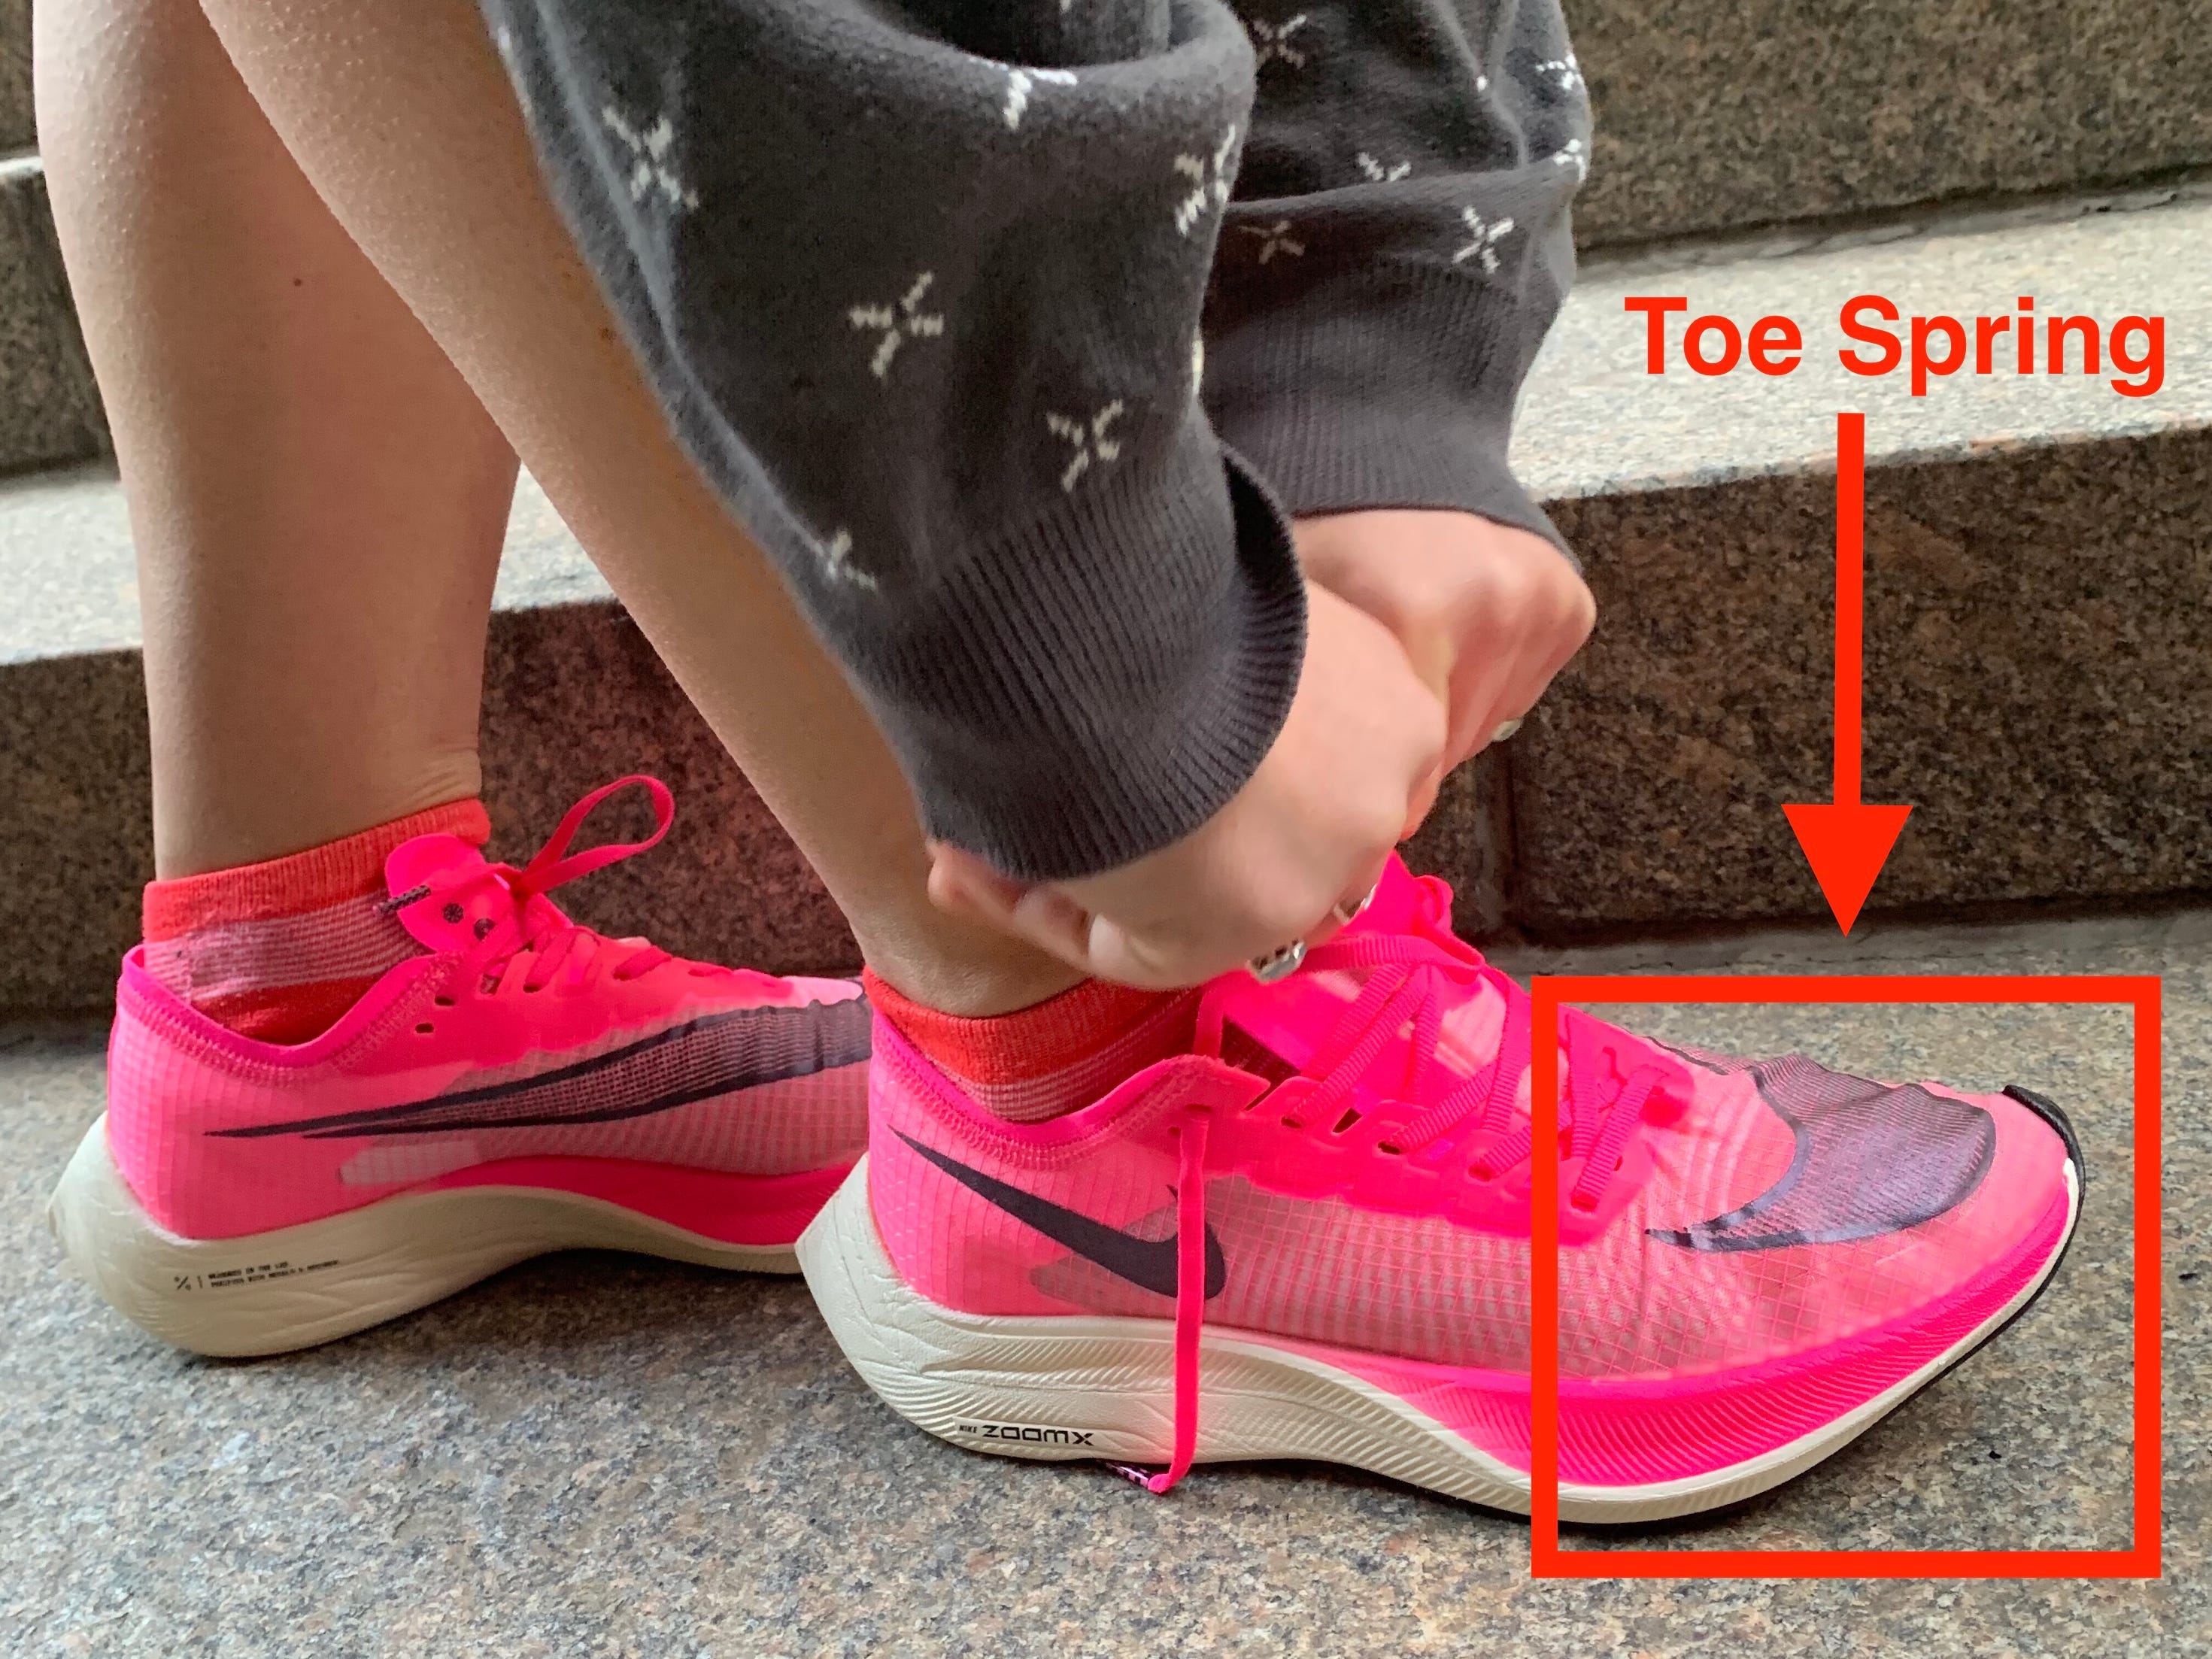 Upward curve at front of modern-day sneakers is called the toe spring. (Aylin Woodward/Business Insider)